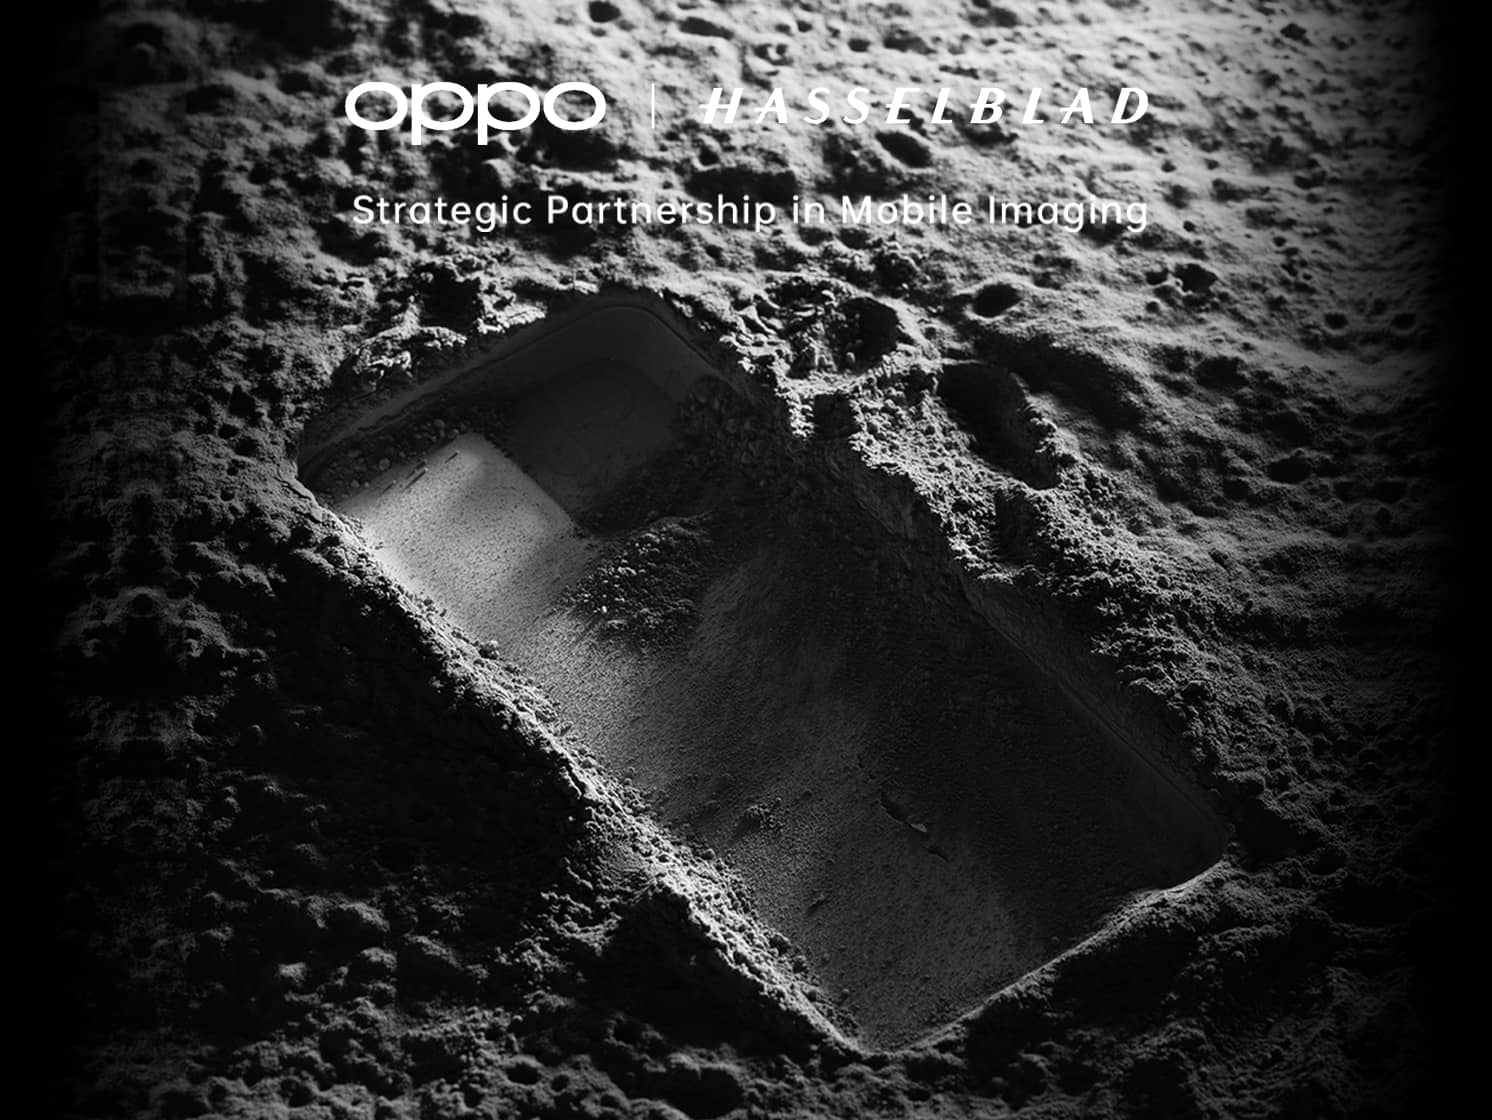 Black and white picture of a phone shaped indent on what is meant to be the moon with OPPO and Hasselblad branding in white text above the image